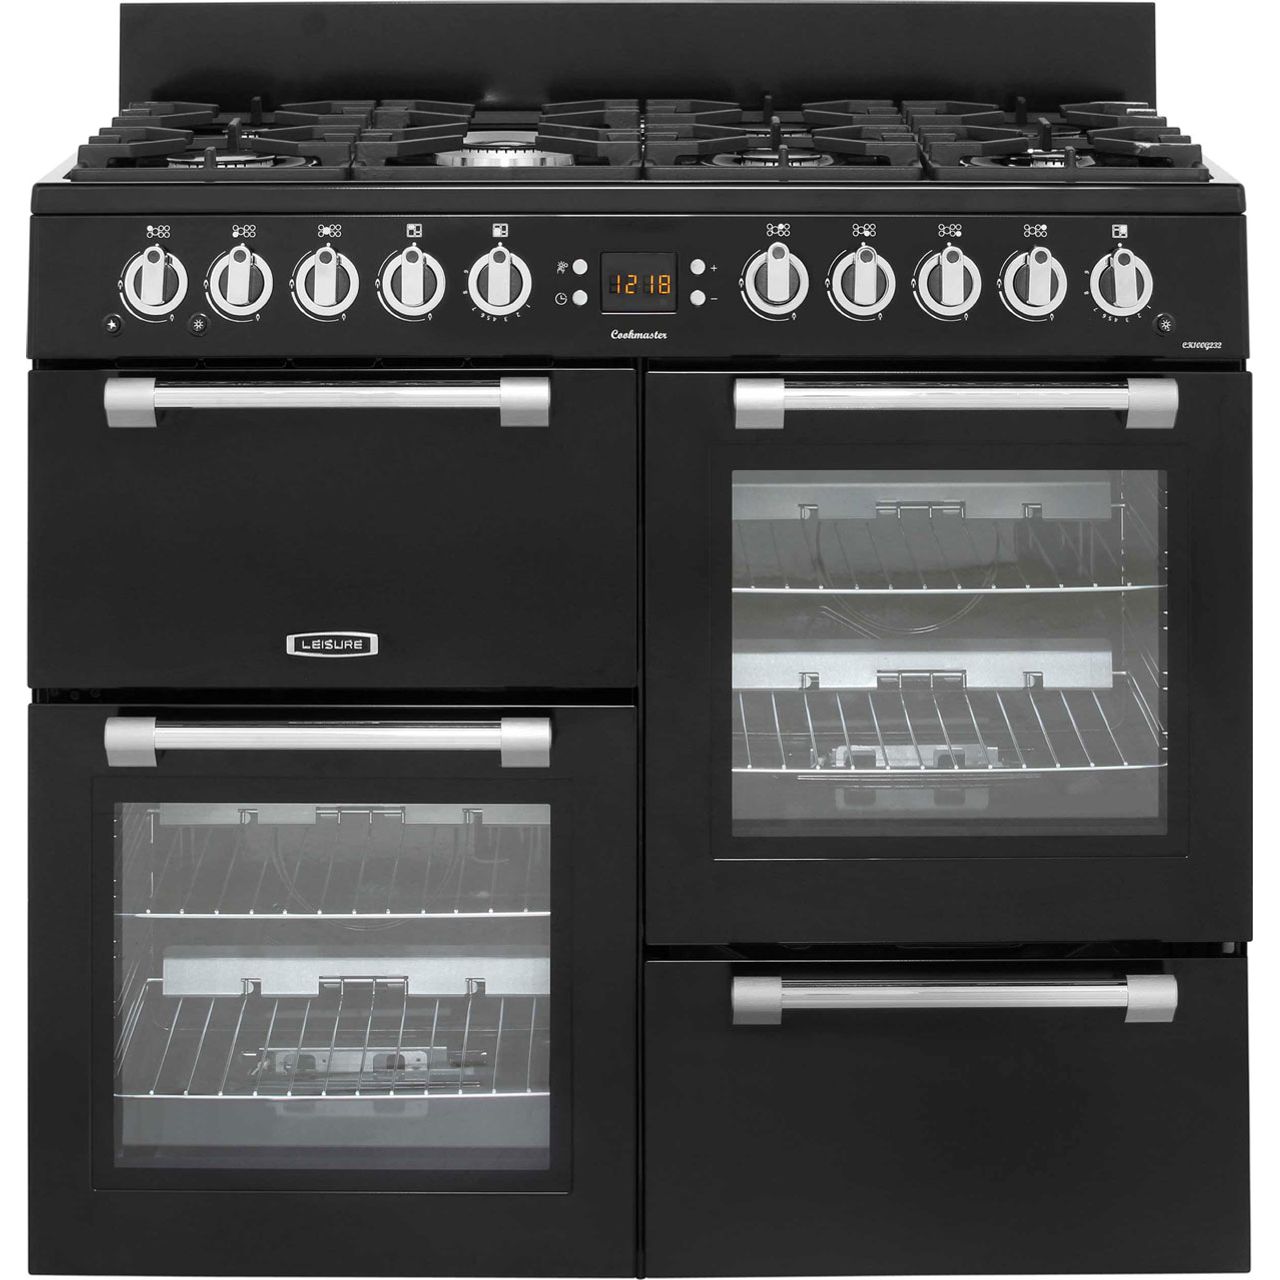 Leisure Cookmaster CK100G232K 100cm Gas Range Cooker Review